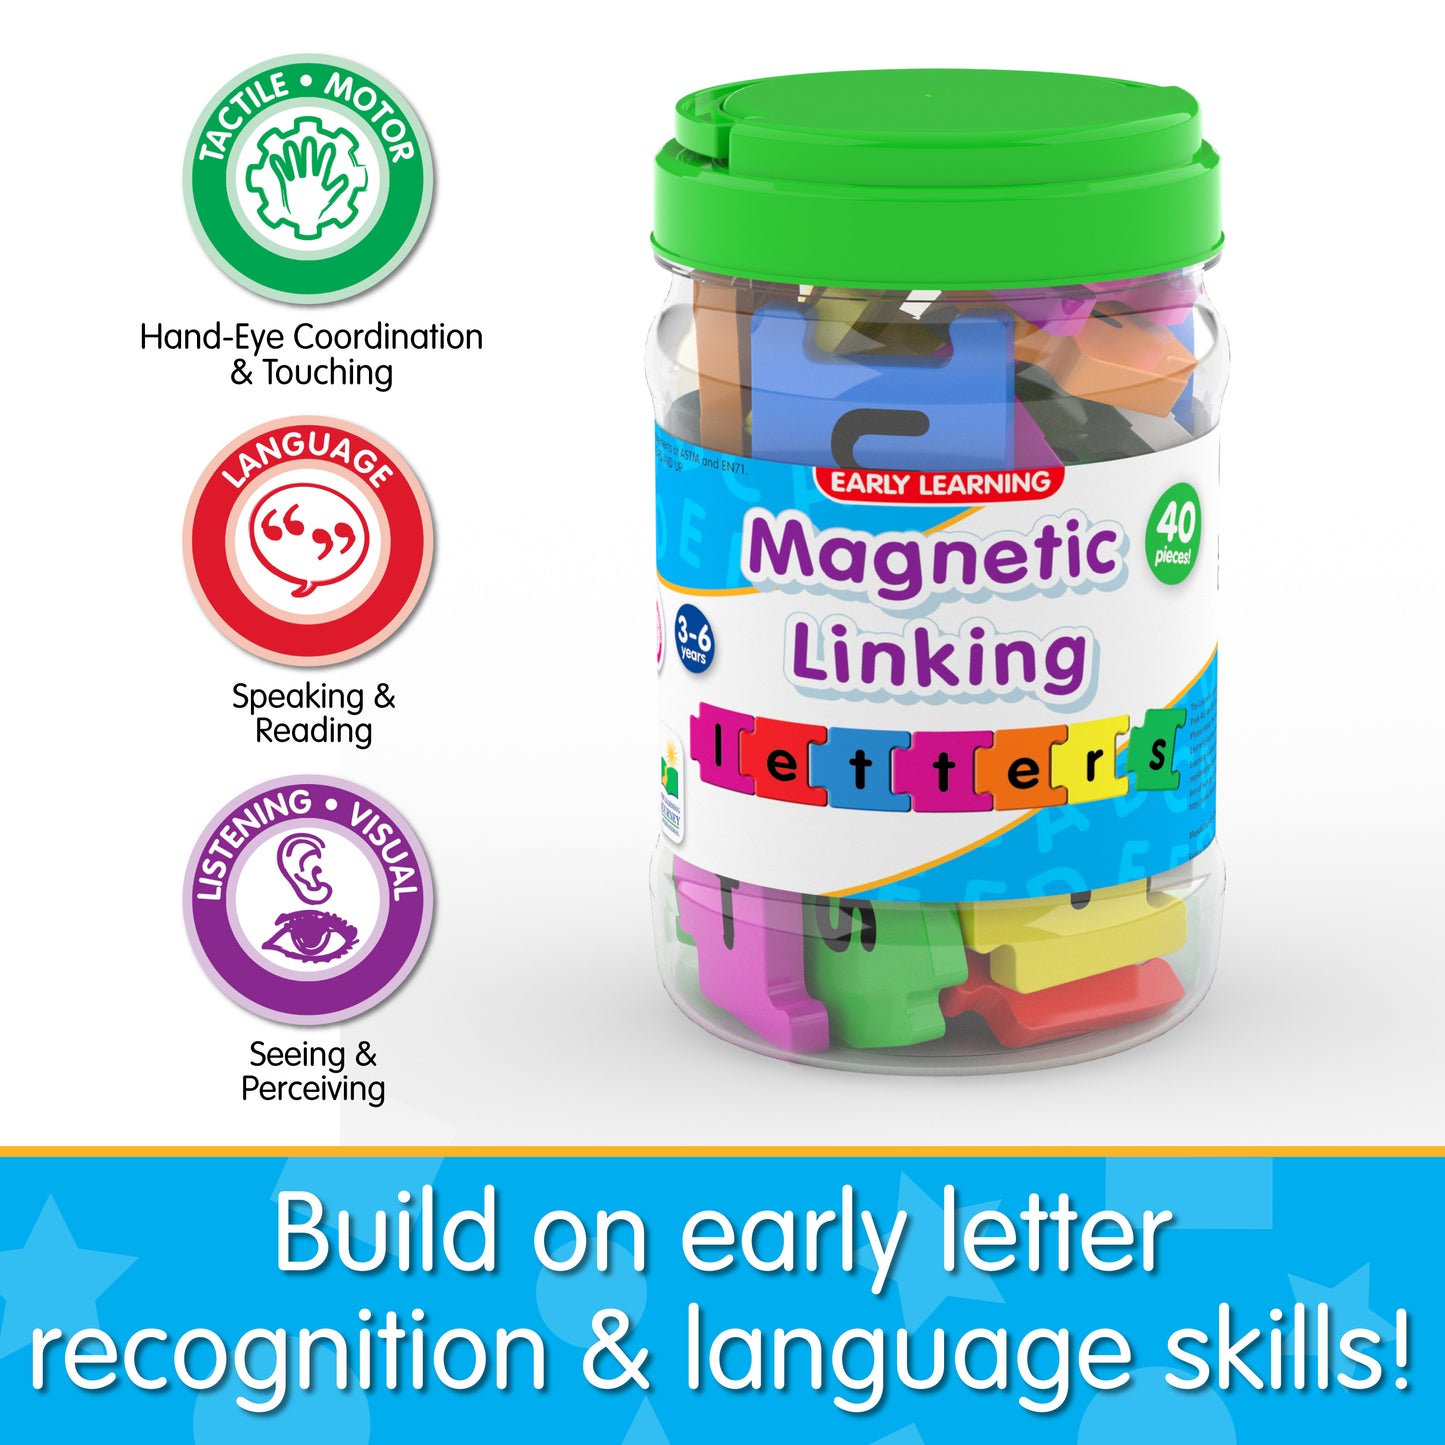 Infographic about Magnetic Linking Letters' educational benefits that says, "Build on early letter recognition and language skills!"